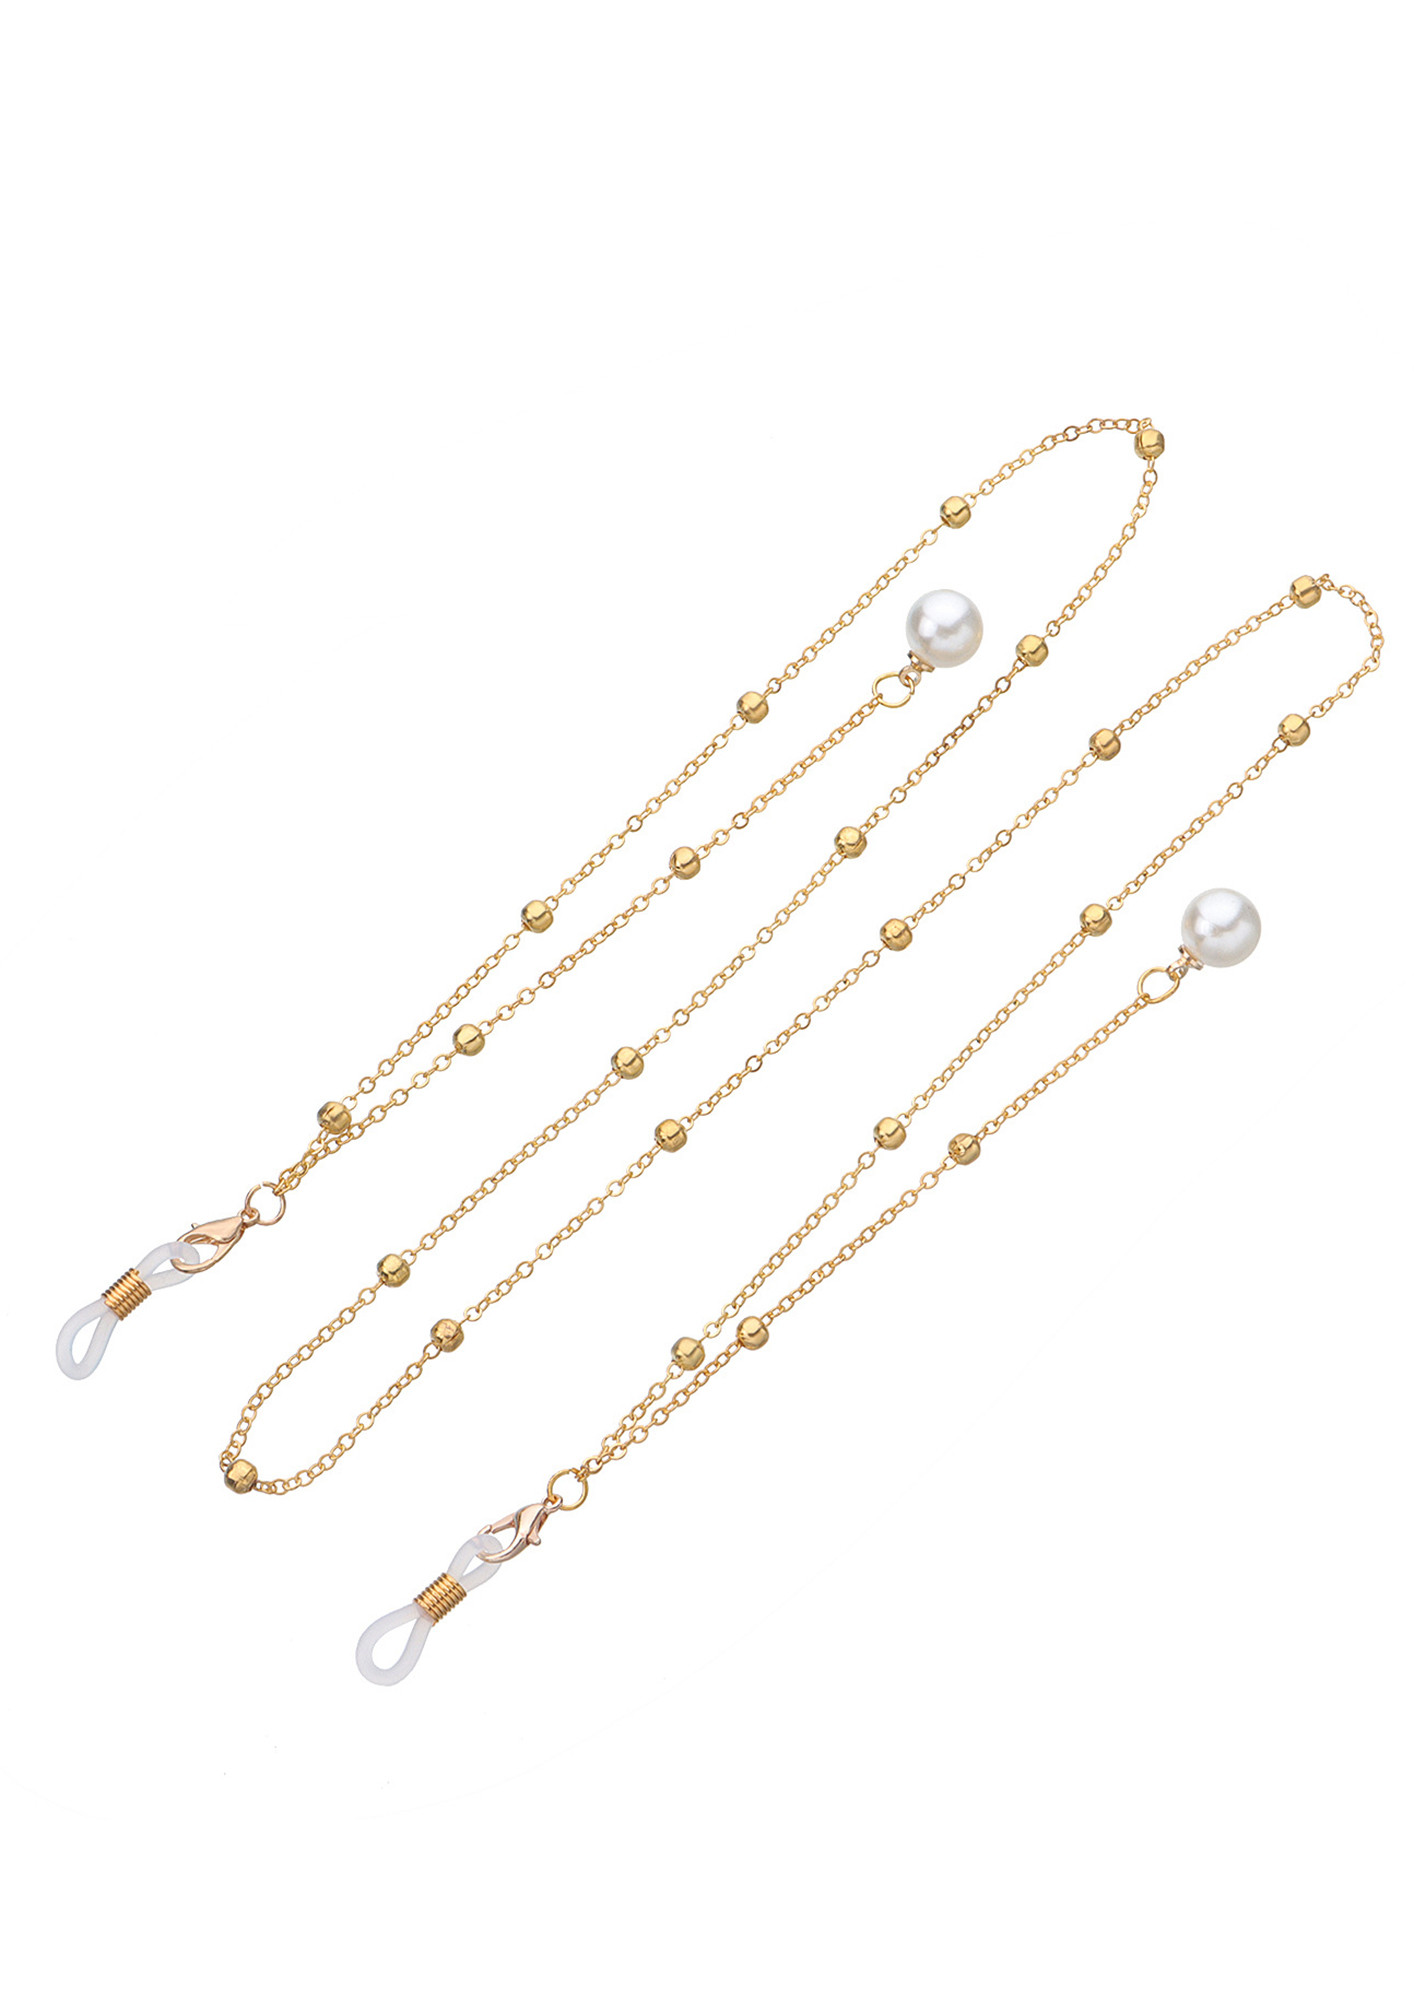 GOLDEN PEARLS GLASS CHAIN